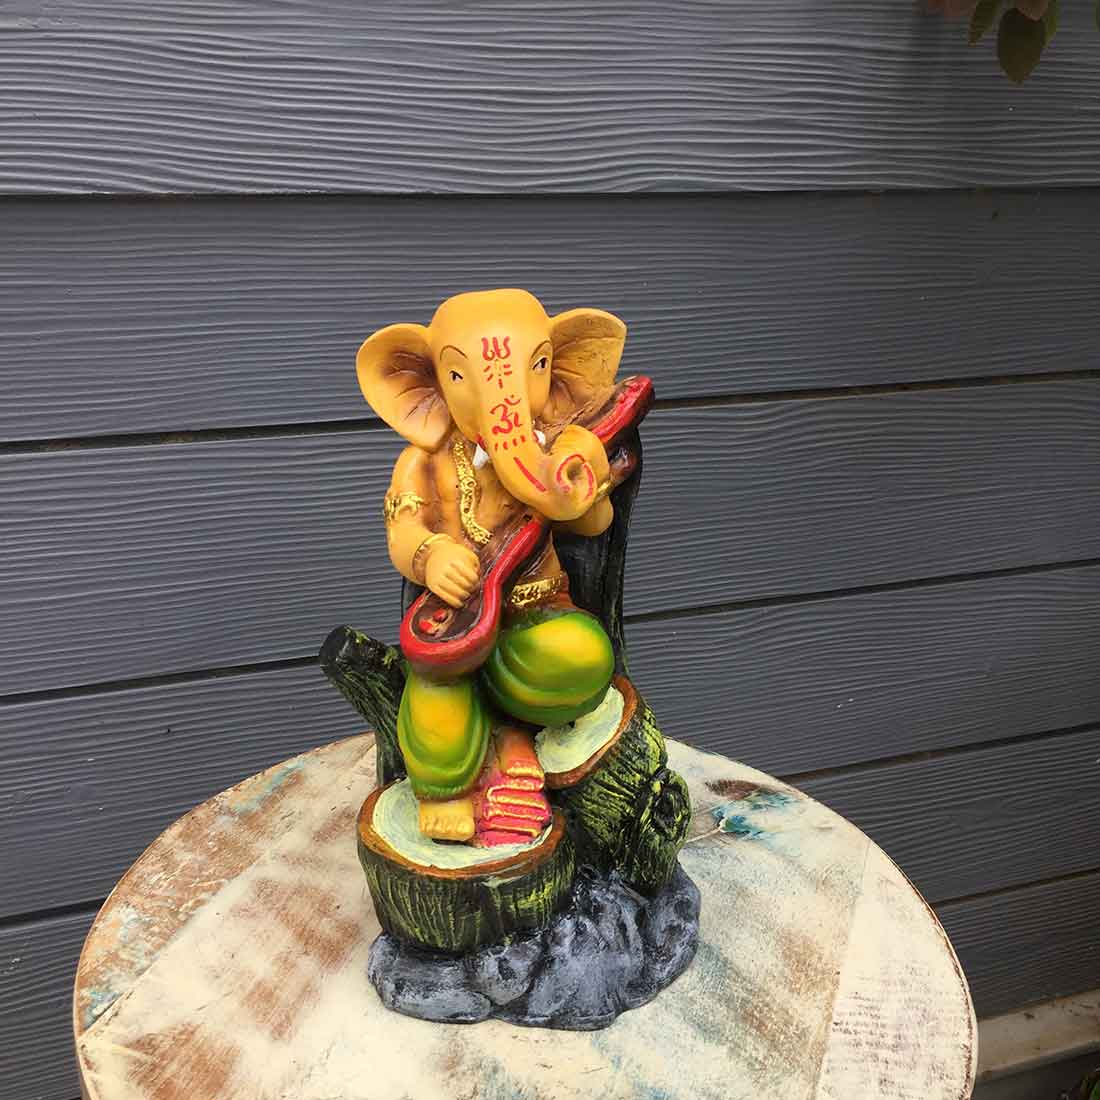 Ganapathi Statue | Ganesh Murti  - for Home, Office & Gift - 11 Inches - ApkaMart